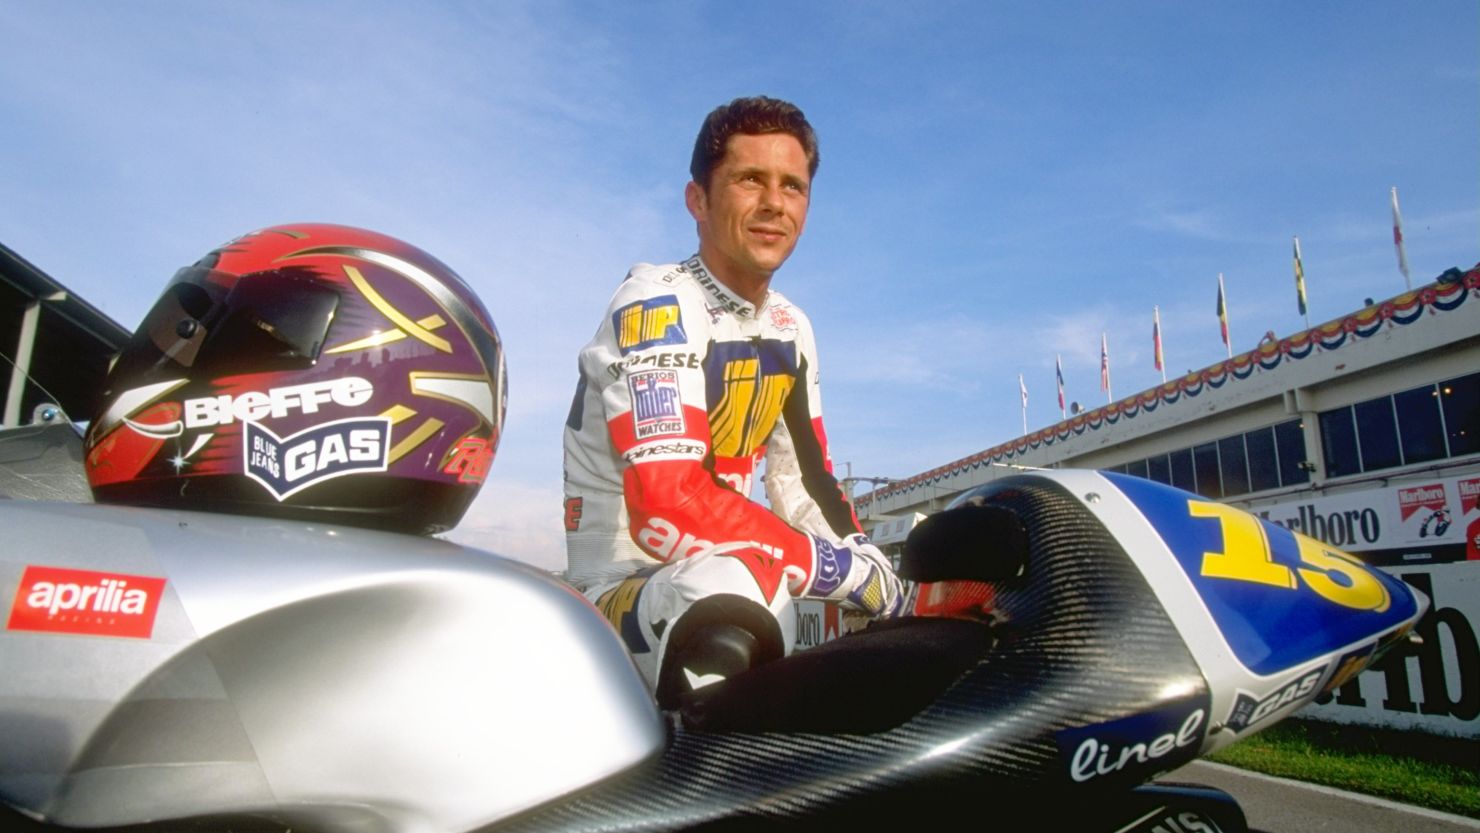 Italy's Dariano Romboni in a picture taken prior to the 1996 Malaysian Grand Prix. 